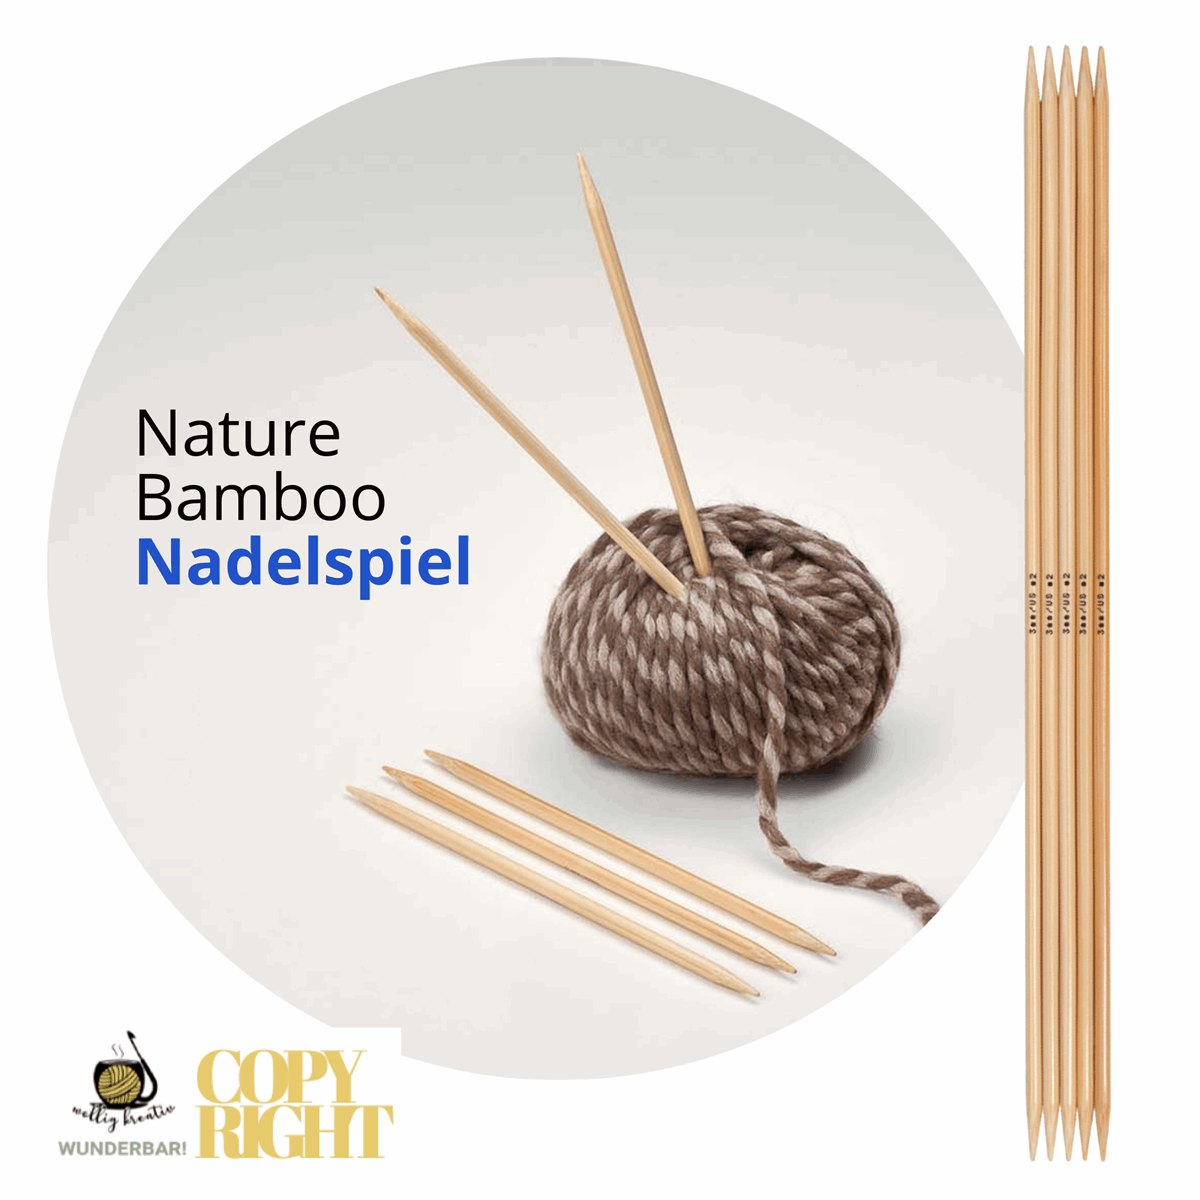 Addi, Nature Bamboo double pointed needles, 65012, size 6.5 length 15 cm